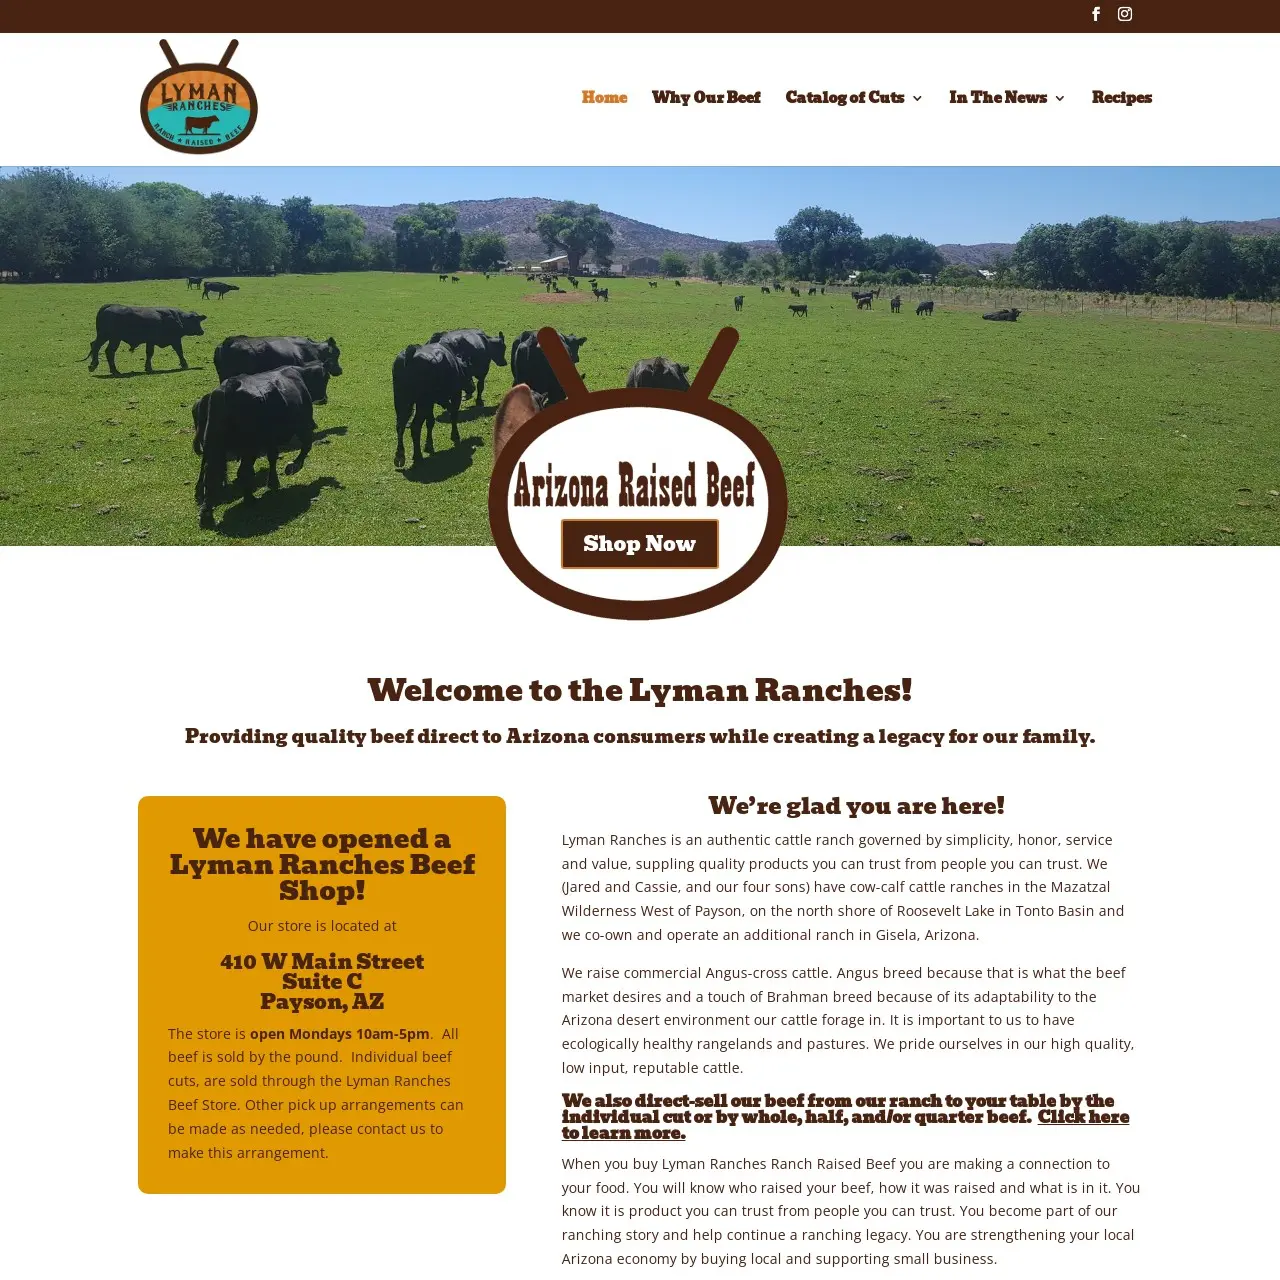 Celebrate the spirit of community as Shield Bar Marketing donates a website design and hosting package to Lyman Ranch, a proud Arizona rancher displaced by wildfire, creating a captivating online presence that incorporates their existing brand and features a user-friendly shopping cart.